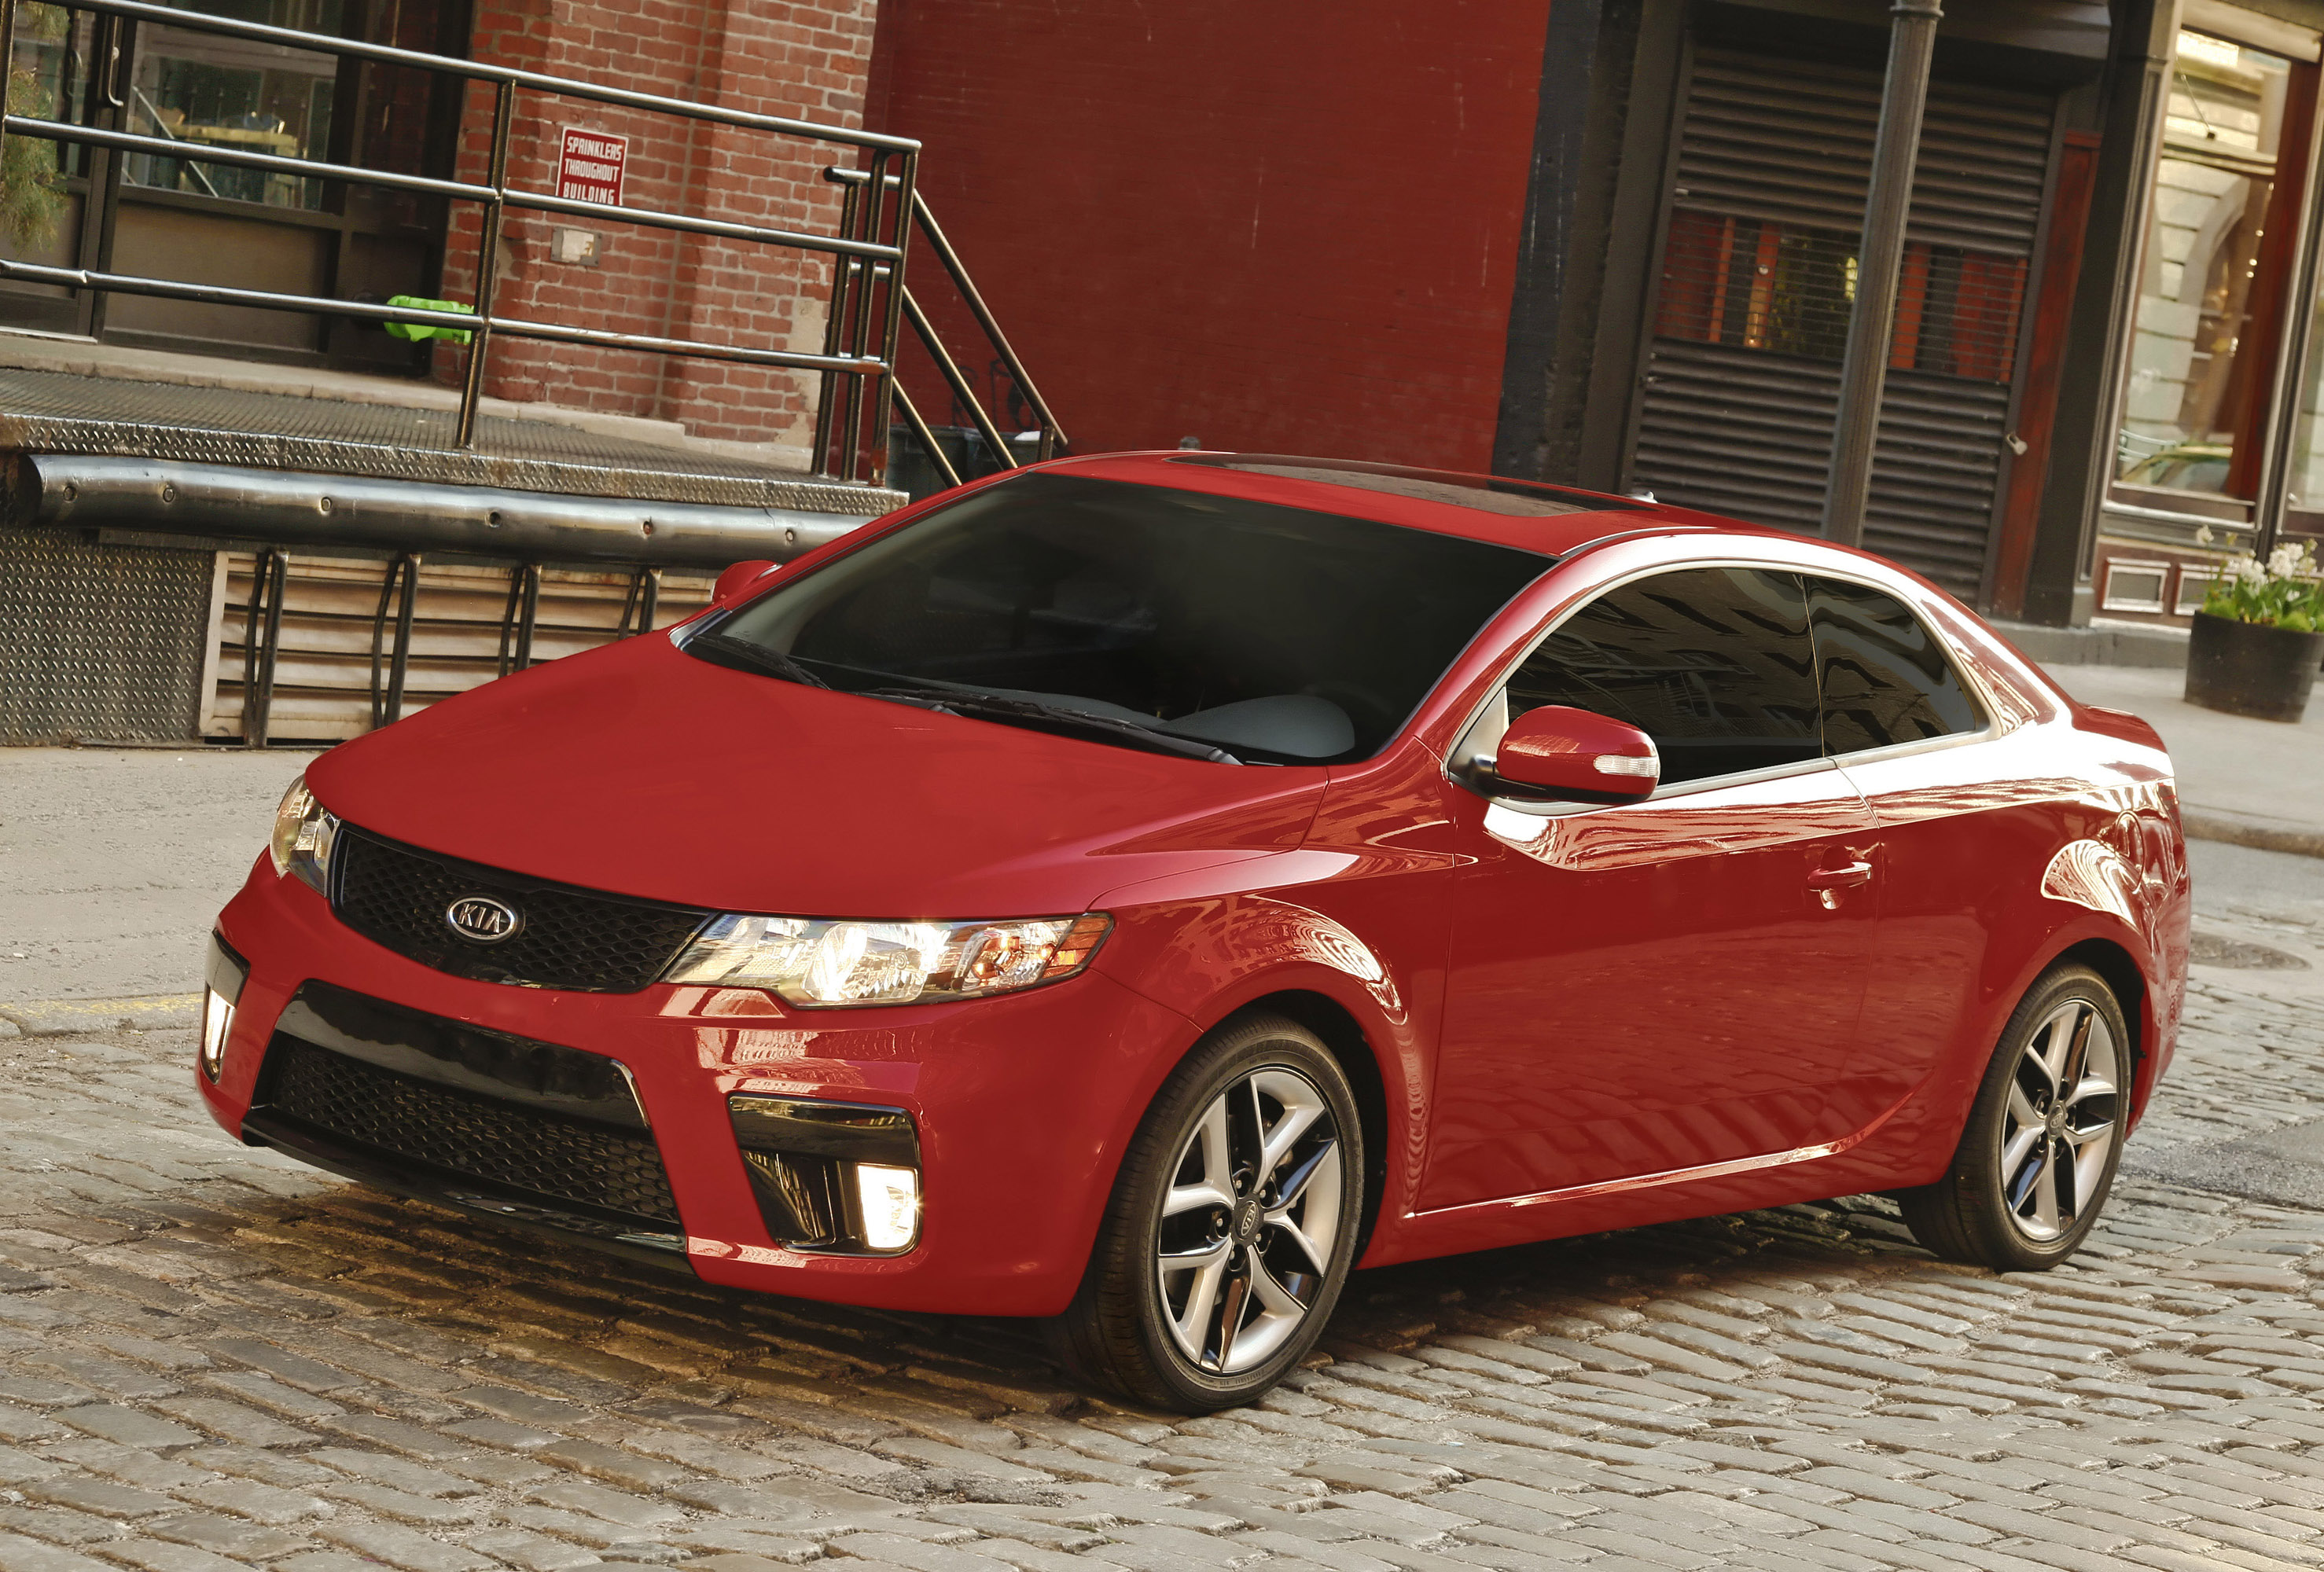 Kia America launches the All-New 2010 Forte Koup